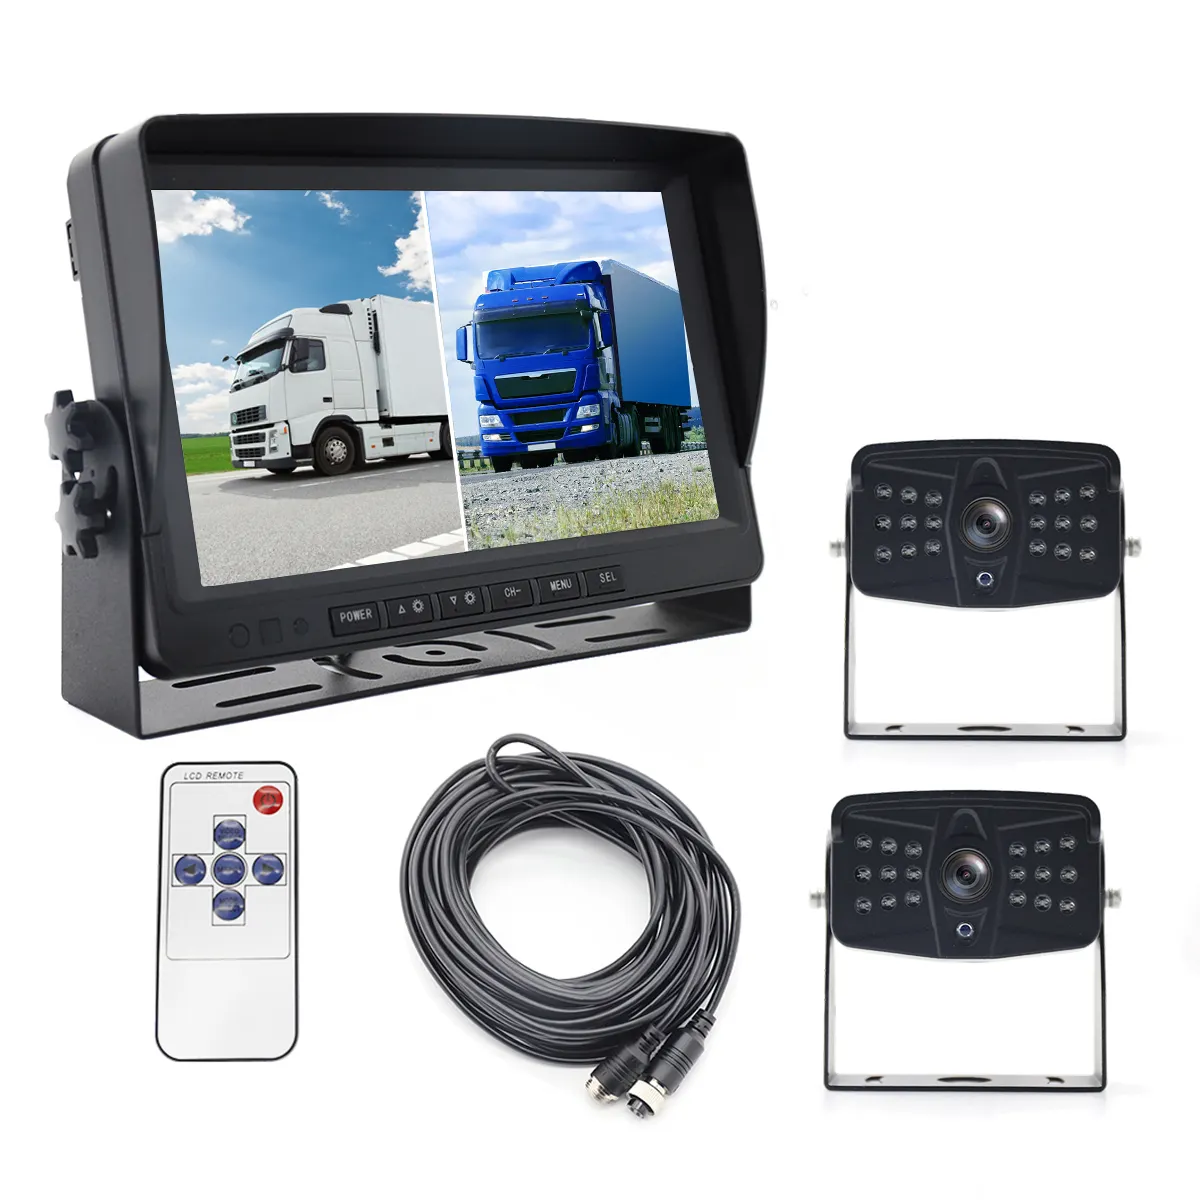 9 inch 2ch Car Monitor for Auto 2 Split Car Screen Roof Mount Monitor Recorder AHD LCD Display for Truck Bus RV Rear View Camera